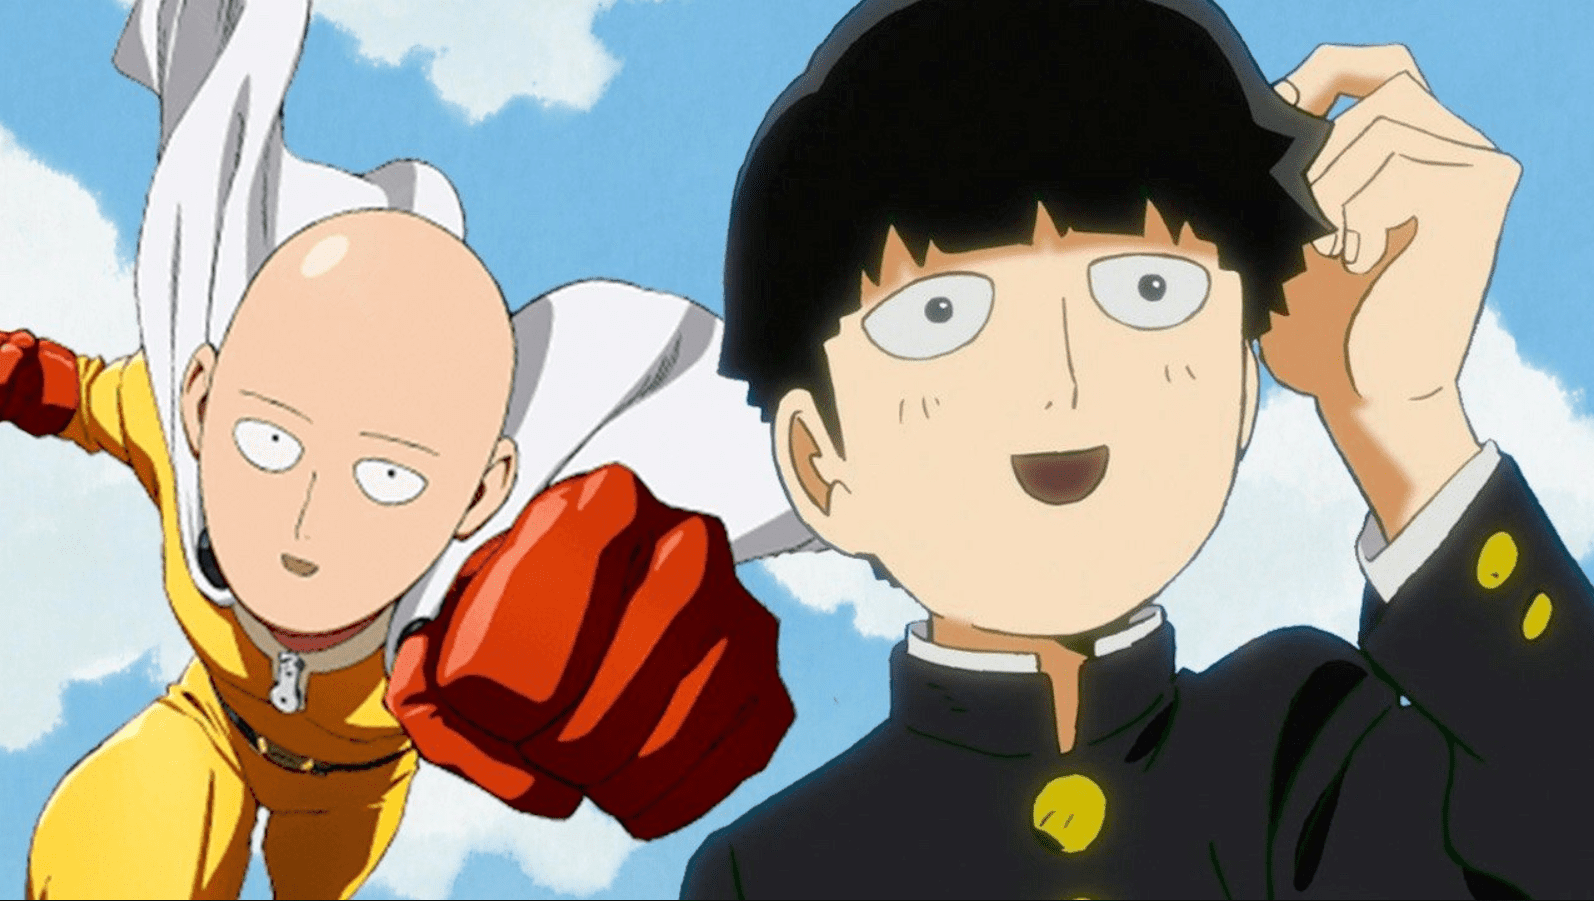 Saitama from One Punch Man and Mob from Mob Psycho 100